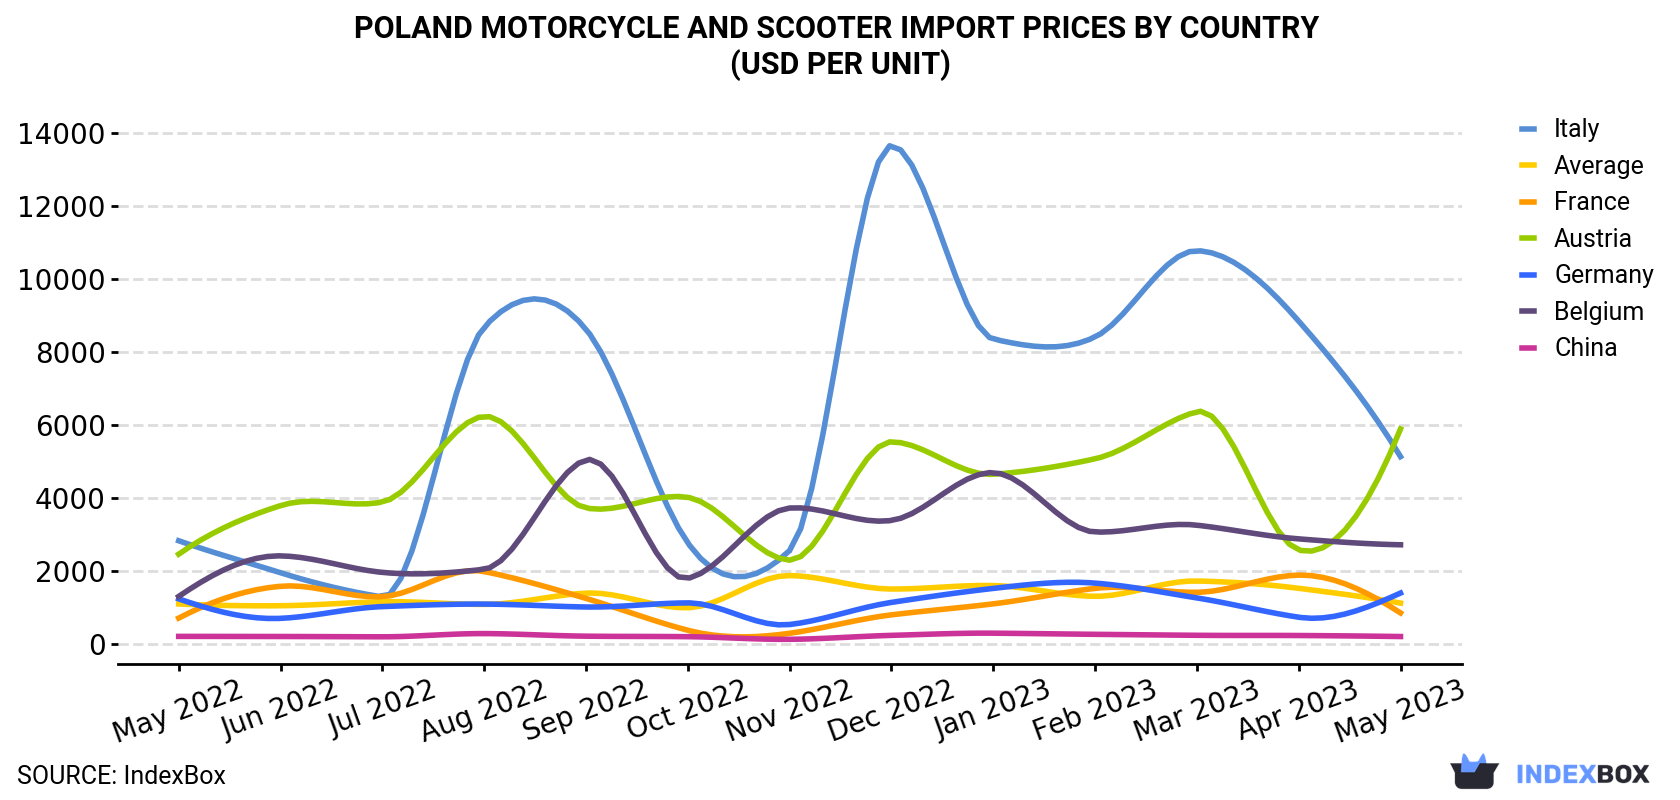 Poland Motorcycle And Scooter Import Prices By Country (USD Per Unit)